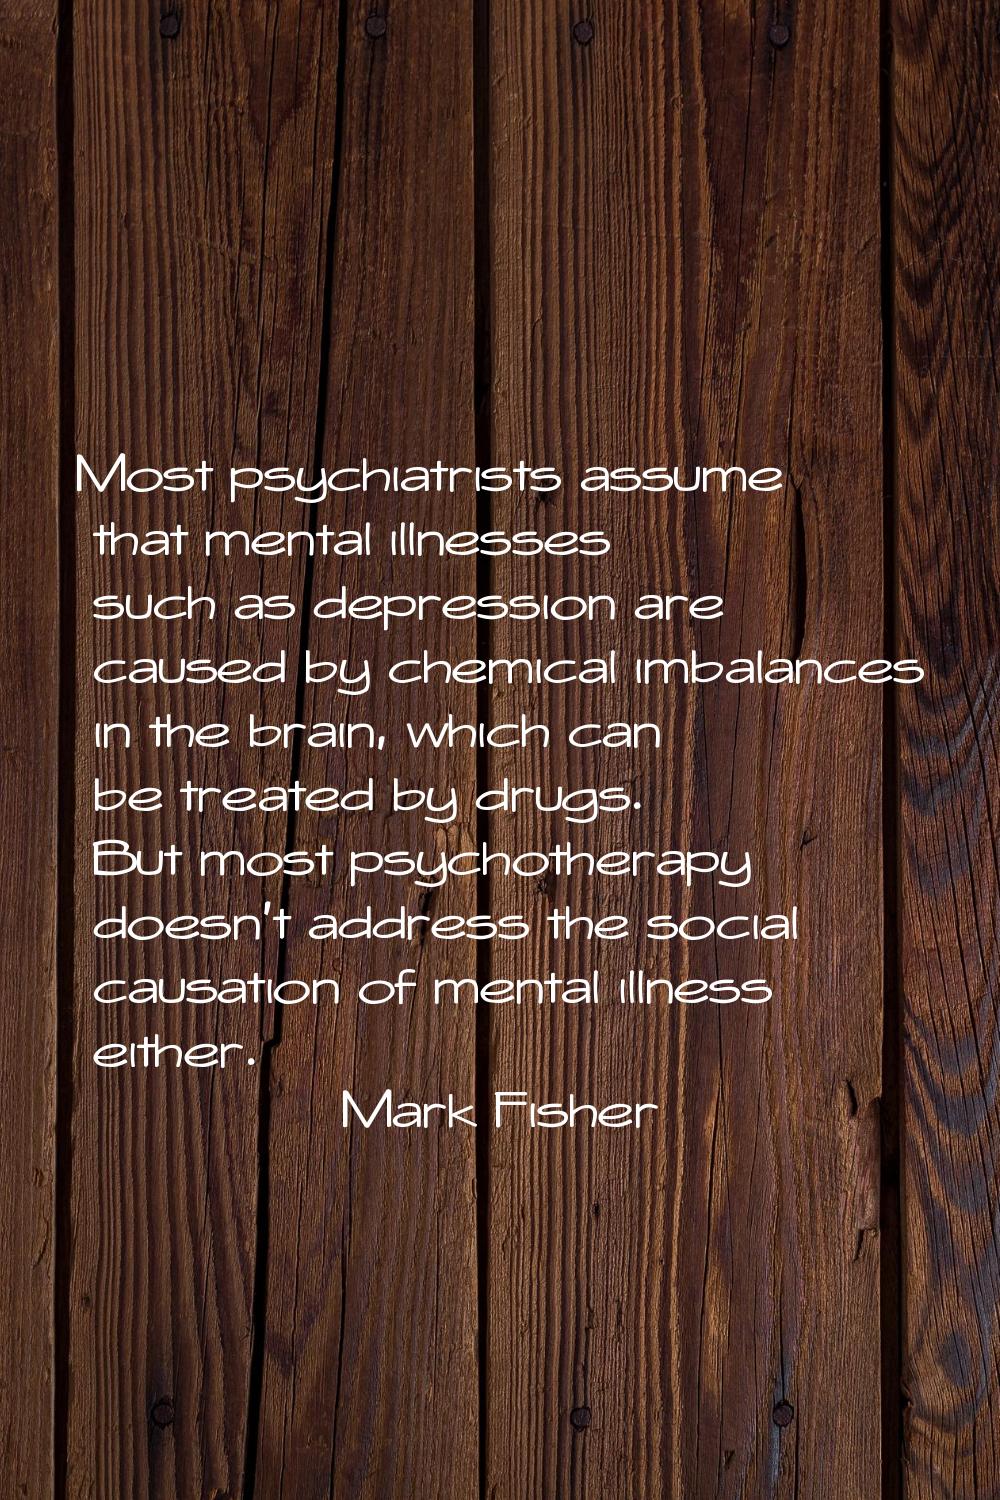 Most psychiatrists assume that mental illnesses such as depression are caused by chemical imbalance